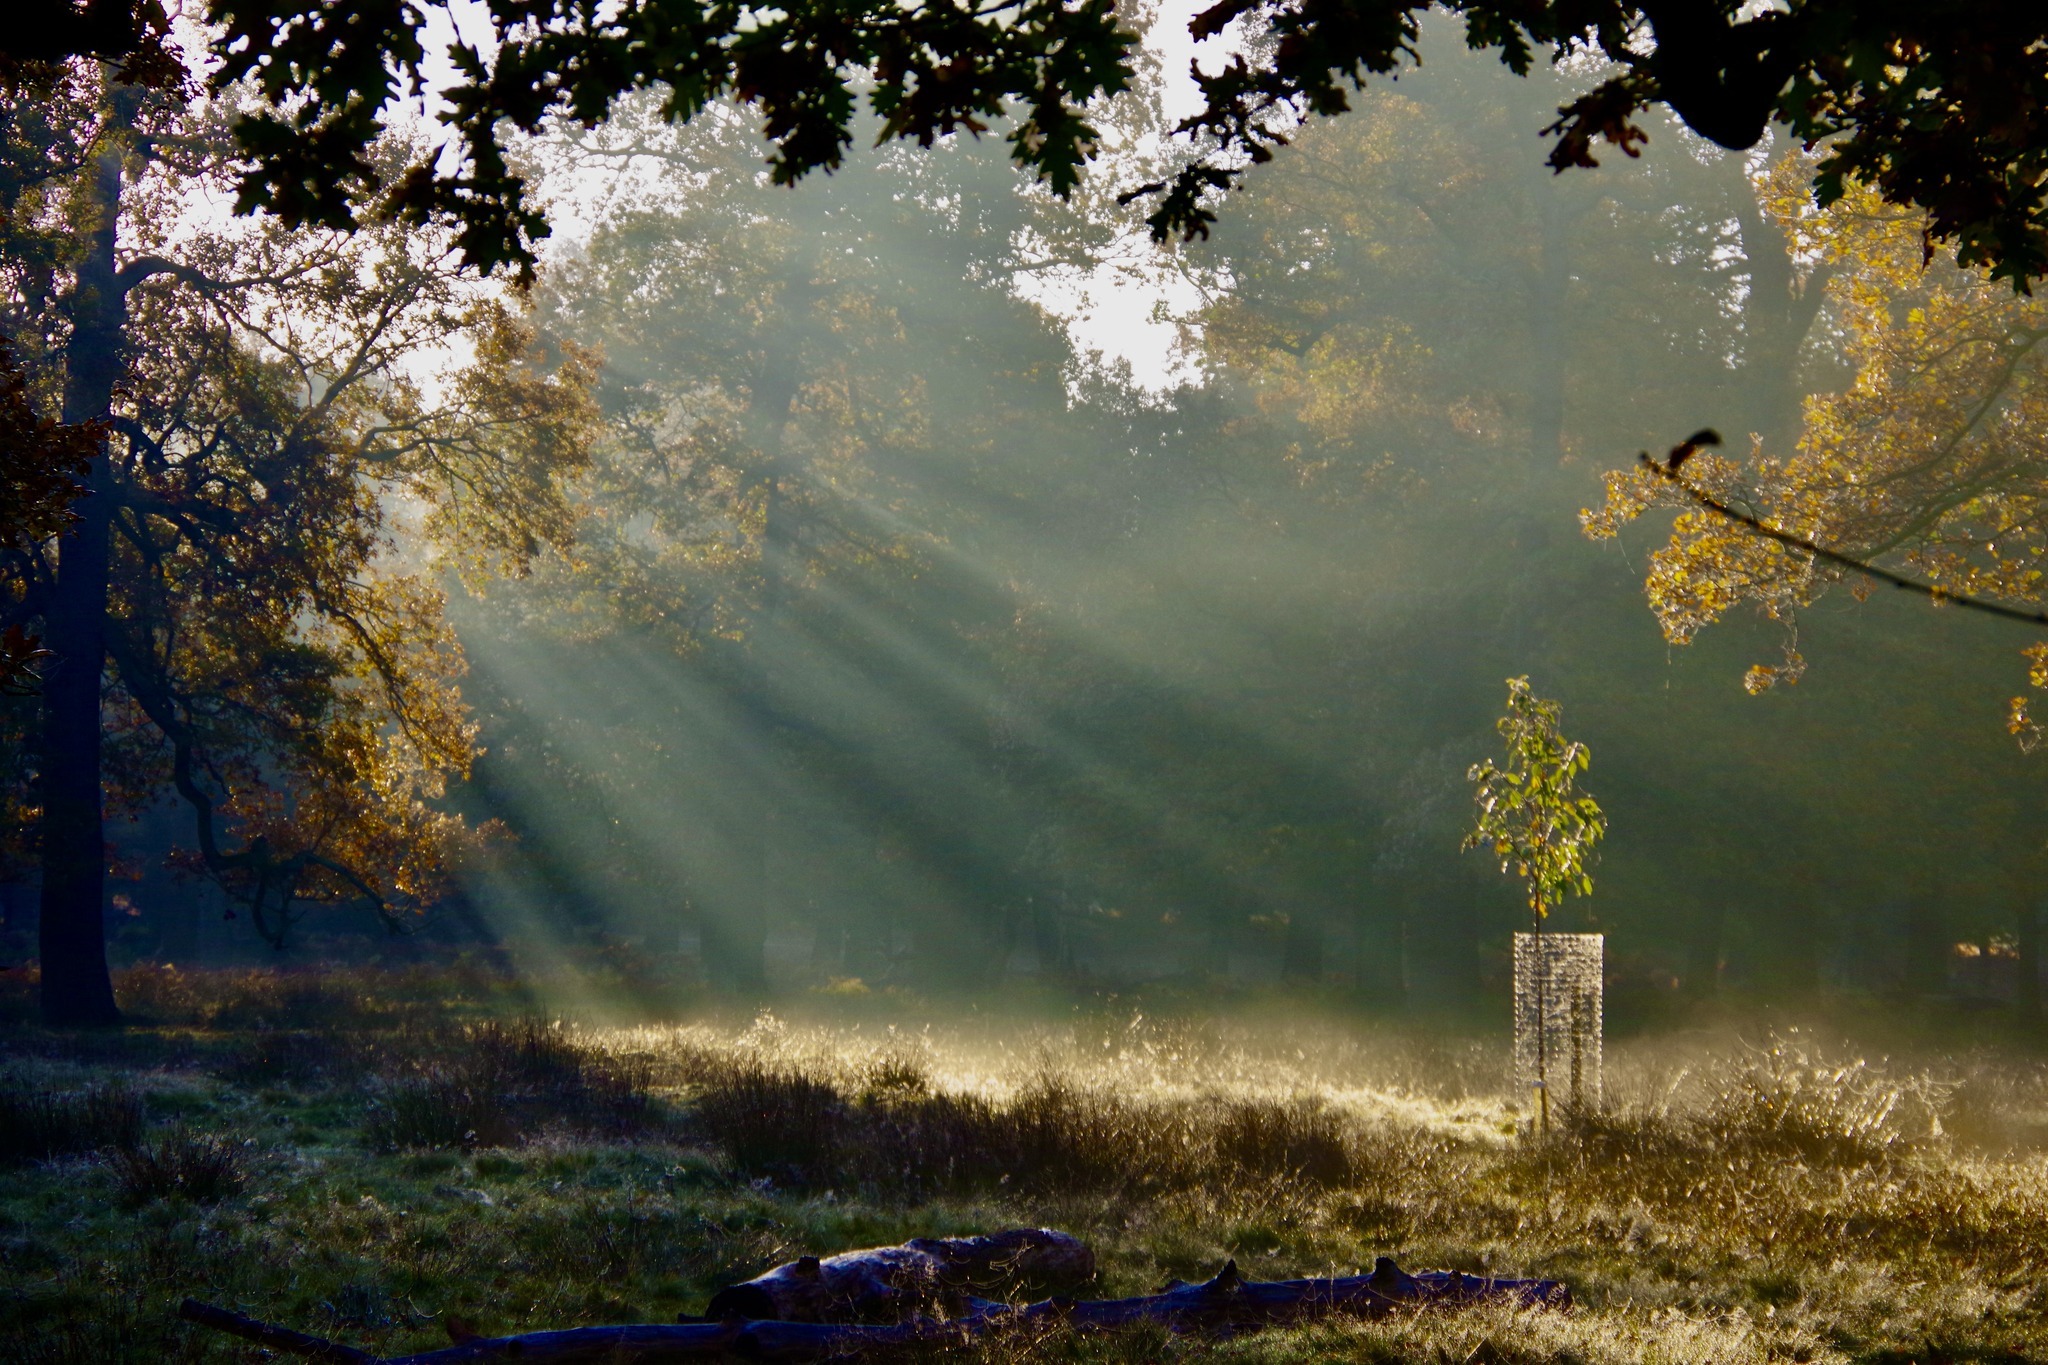 Early morning sunlight at Dunham Park by Terry Gregory